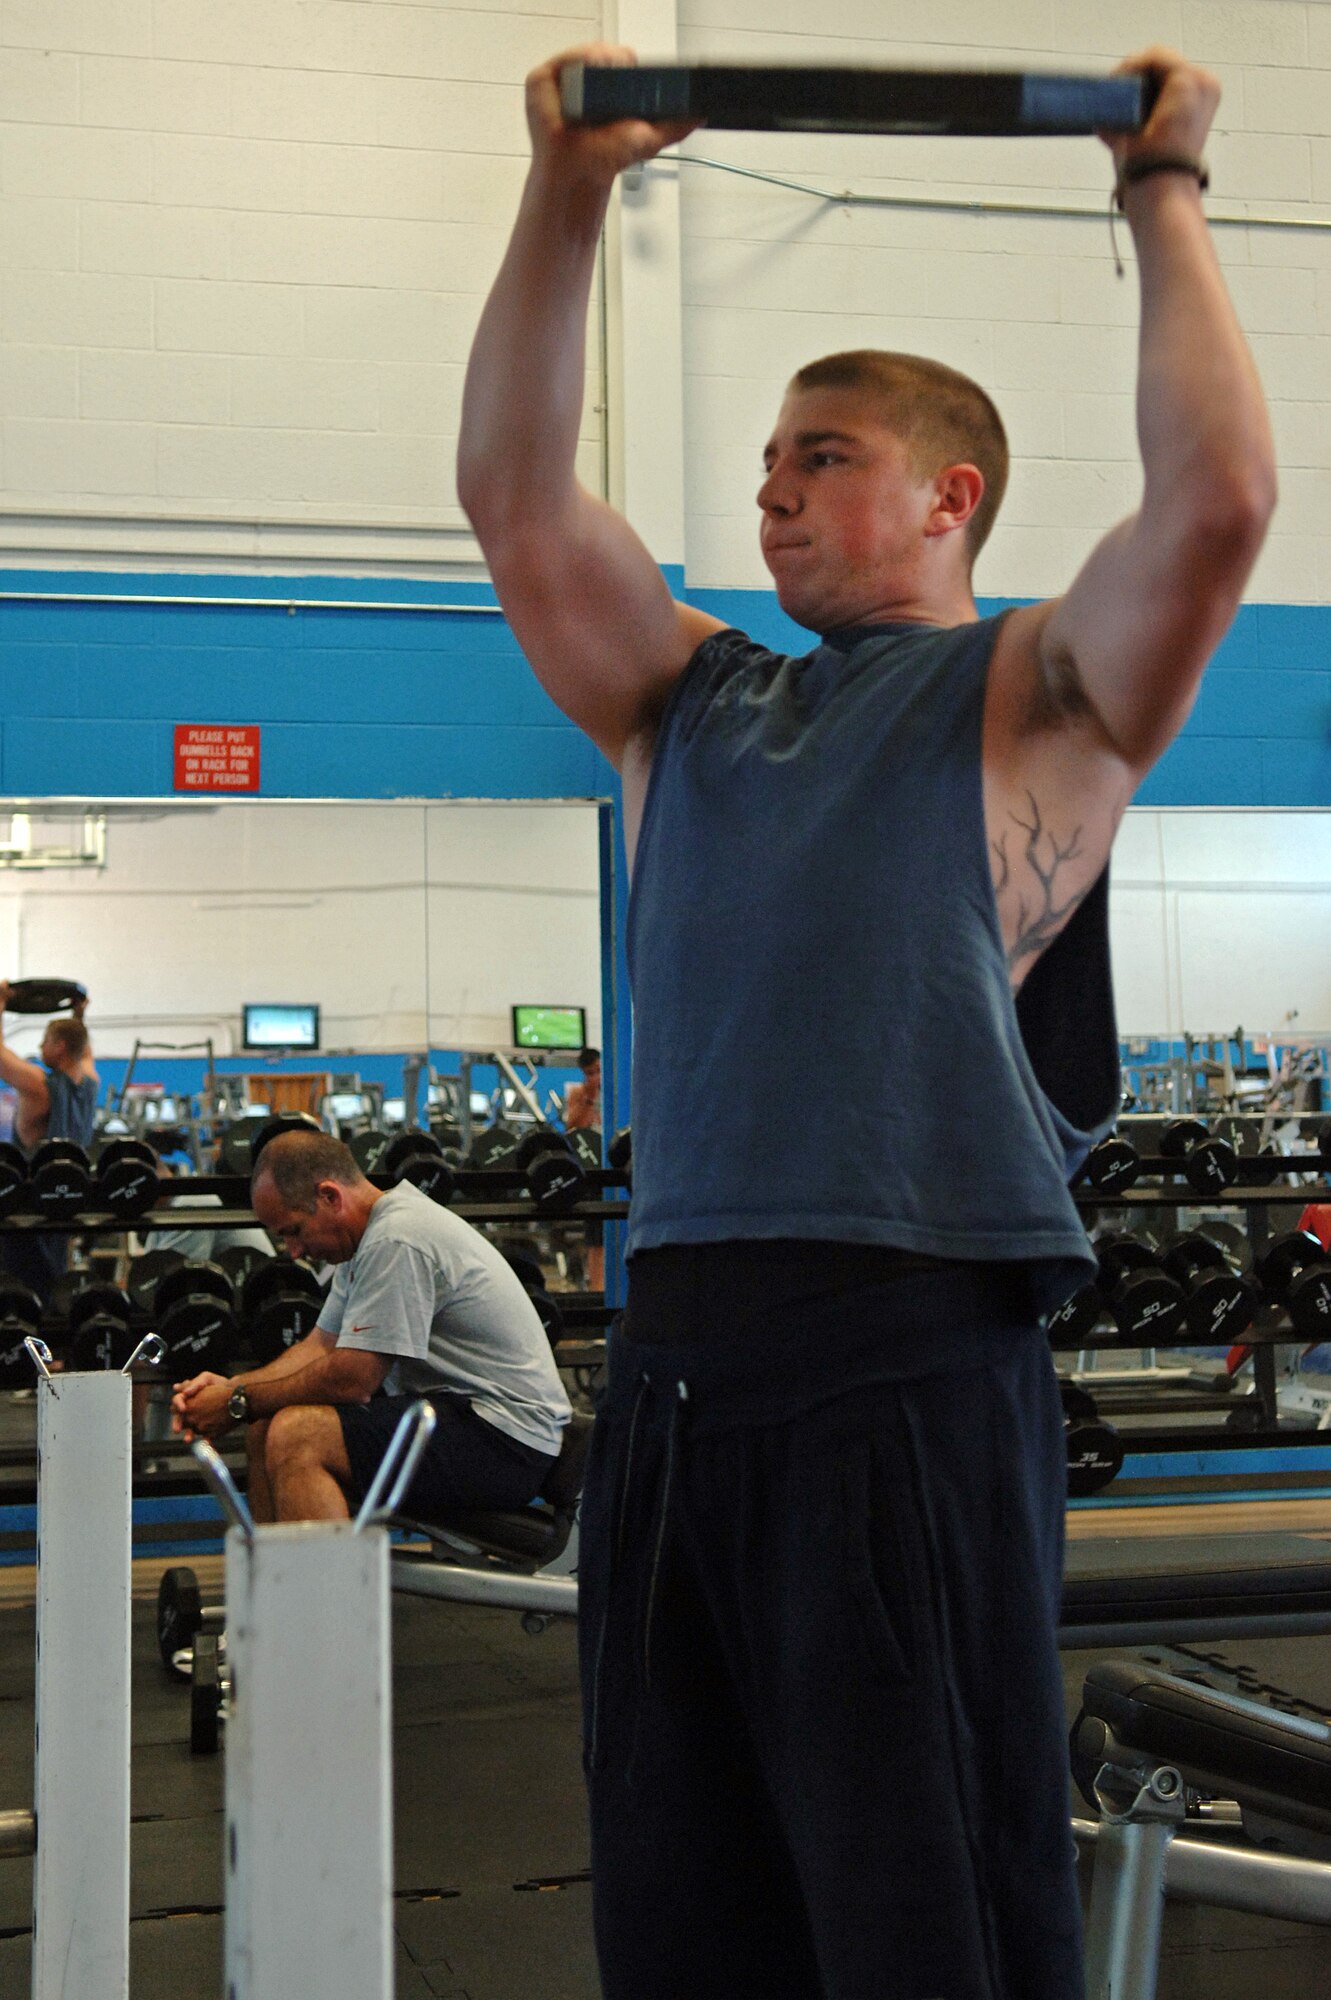 ELLSWORTH AIR FORCE BASE, S.D. – Airman 1st Class Luke Longeretta, 28th Logistics Readiness Squadron aircraft parts store specialist, lifts a 45-pound plate over his head during his workout at the Bellamy Fitness Center, June 22. Airman Longeretta works out to develop a fitness lifestyle, rather than pass a physical training test. (U.S. Air Force photo/ Airman 1st Class Jarad A. Denton)